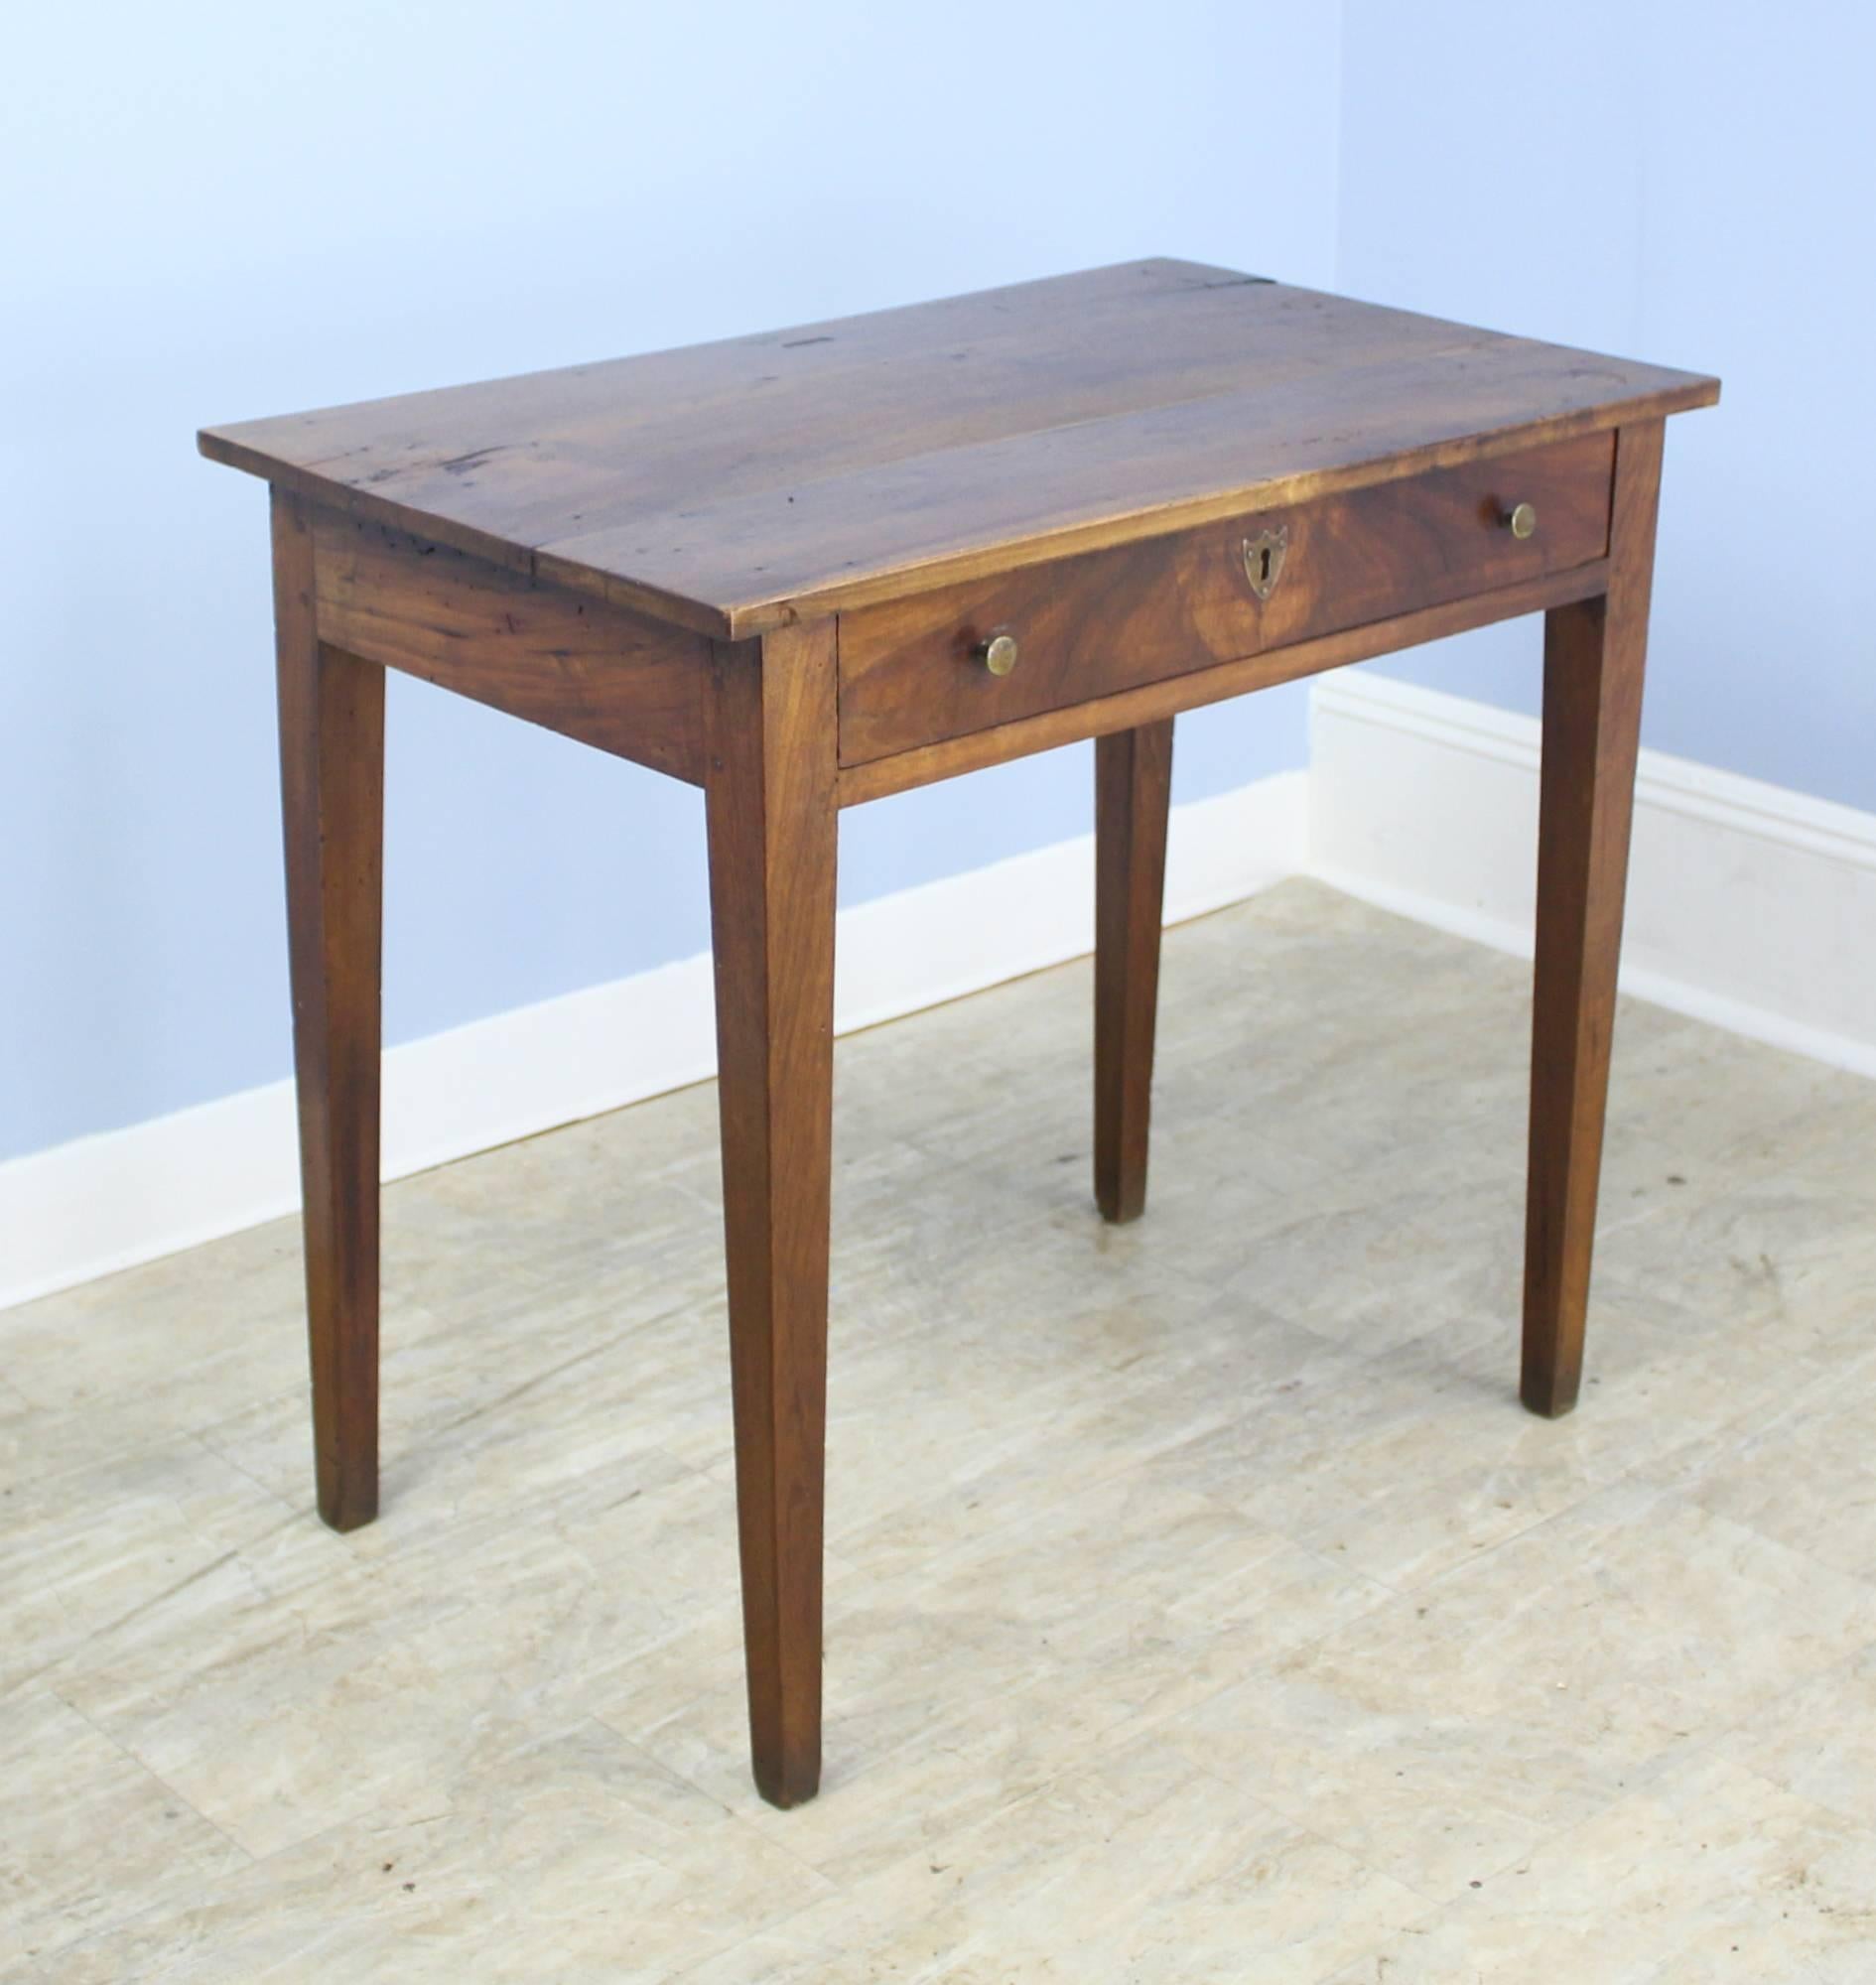 An elegant walnut side table with a beautifully grained top.  Single long drawer and long tapered legs. Beautiful patina and dramatic walnut grain. The large brass escutcheon on the drawer is eye-catching. A Classic!